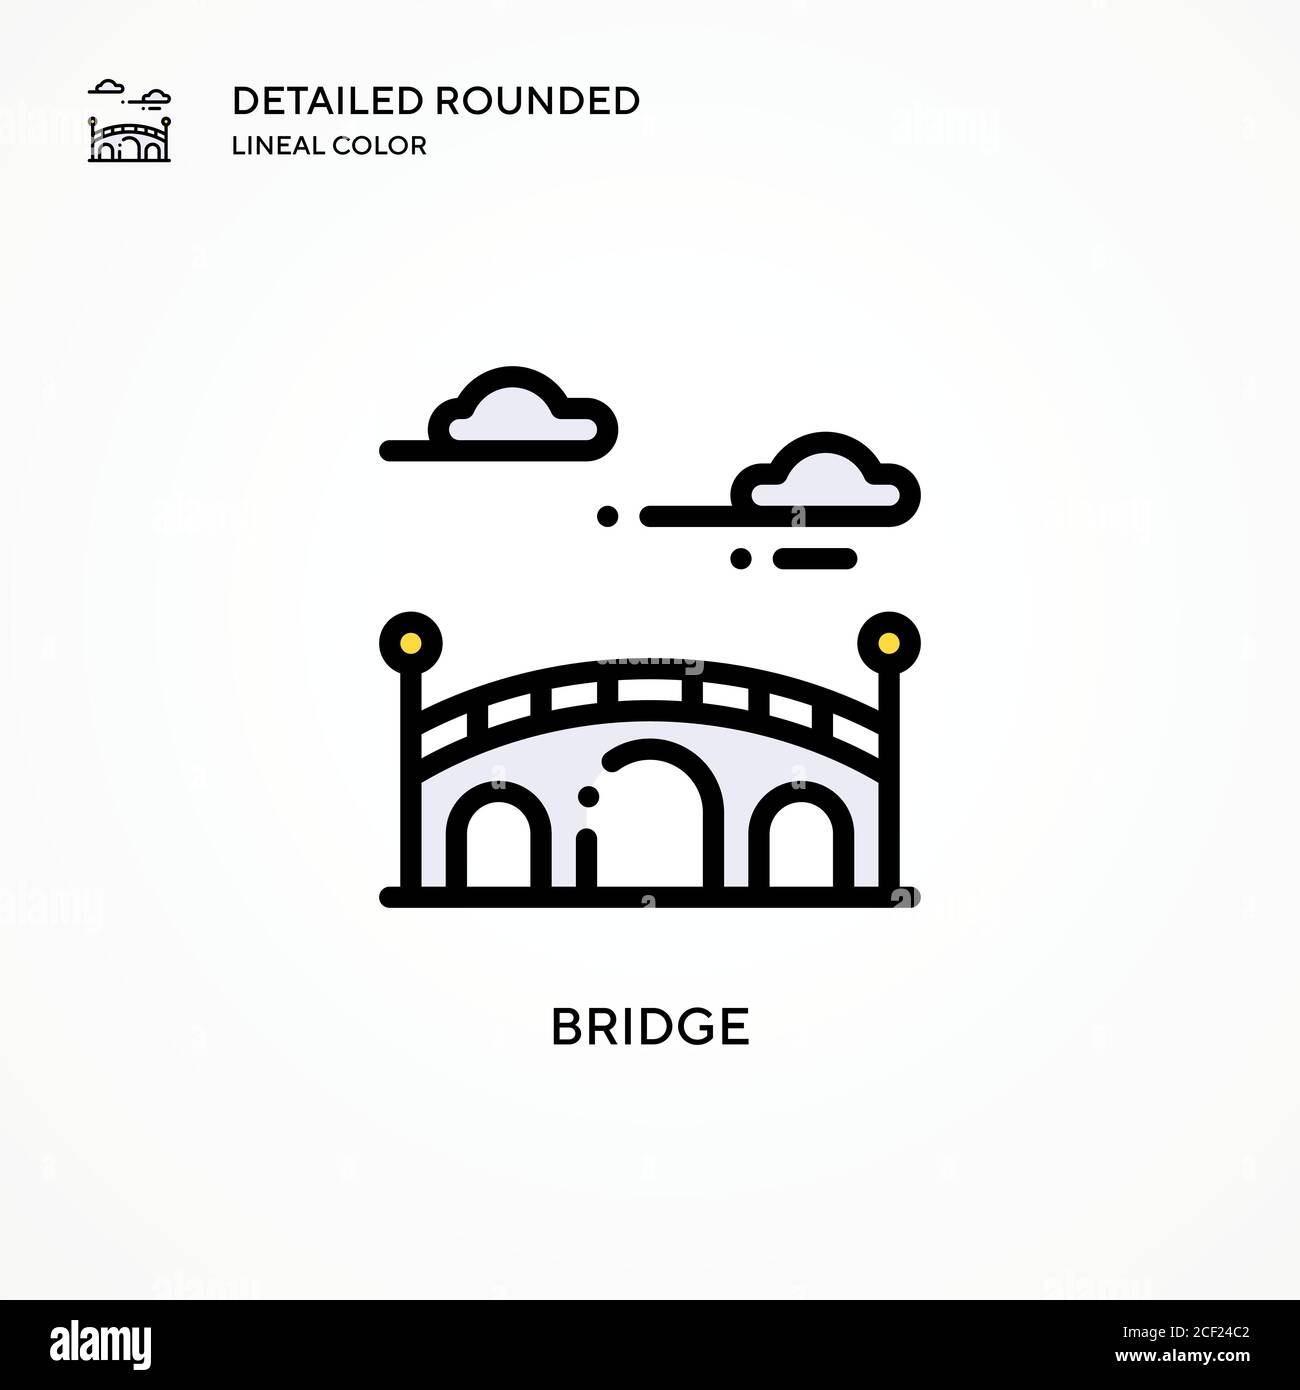 Bridge vector icon. Modern vector illustration concepts. Easy to edit and customize. Stock Vector